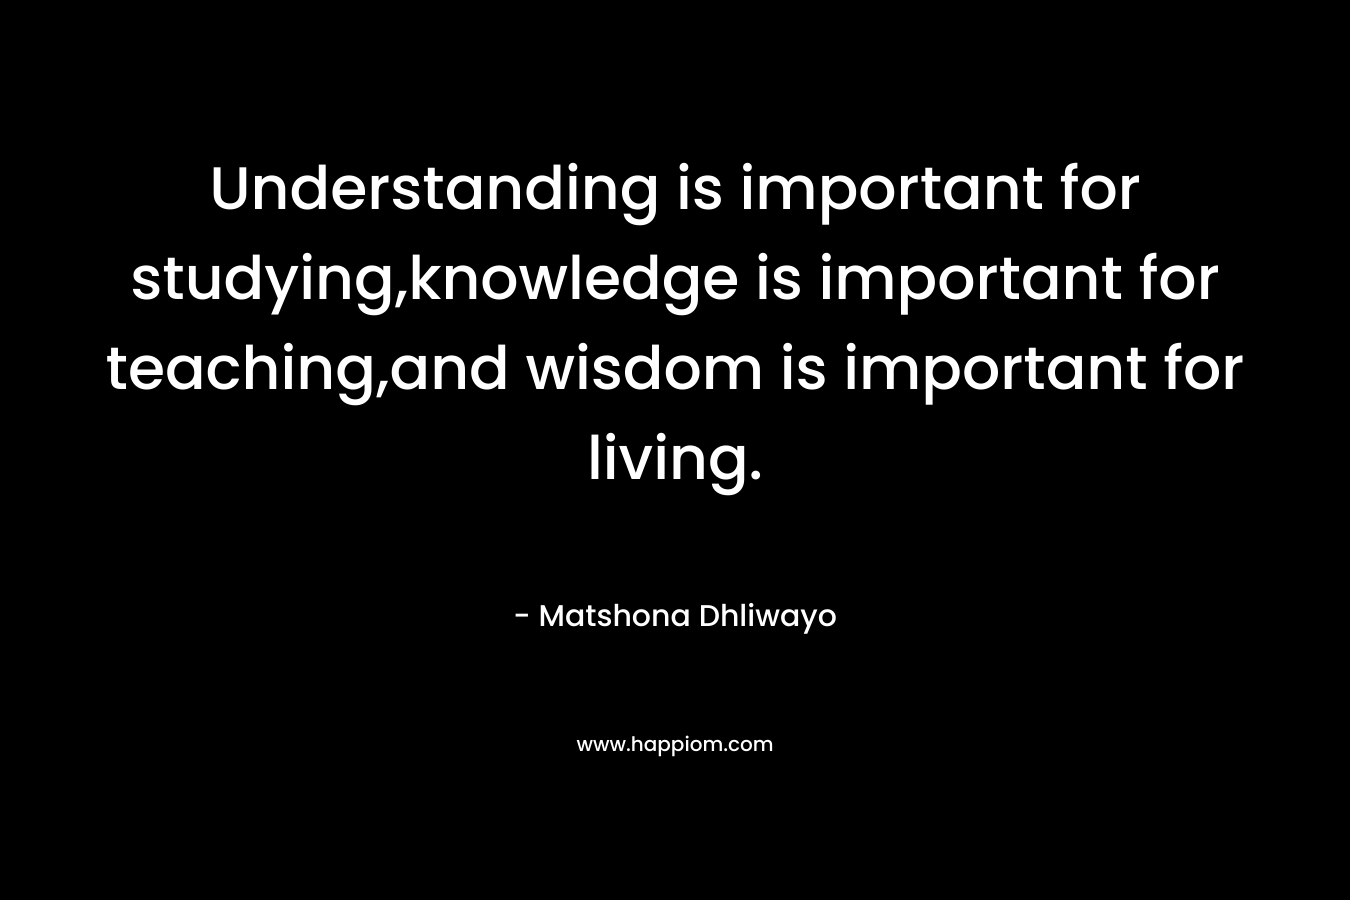 Understanding is important for studying,knowledge is important for teaching,and wisdom is important for living.